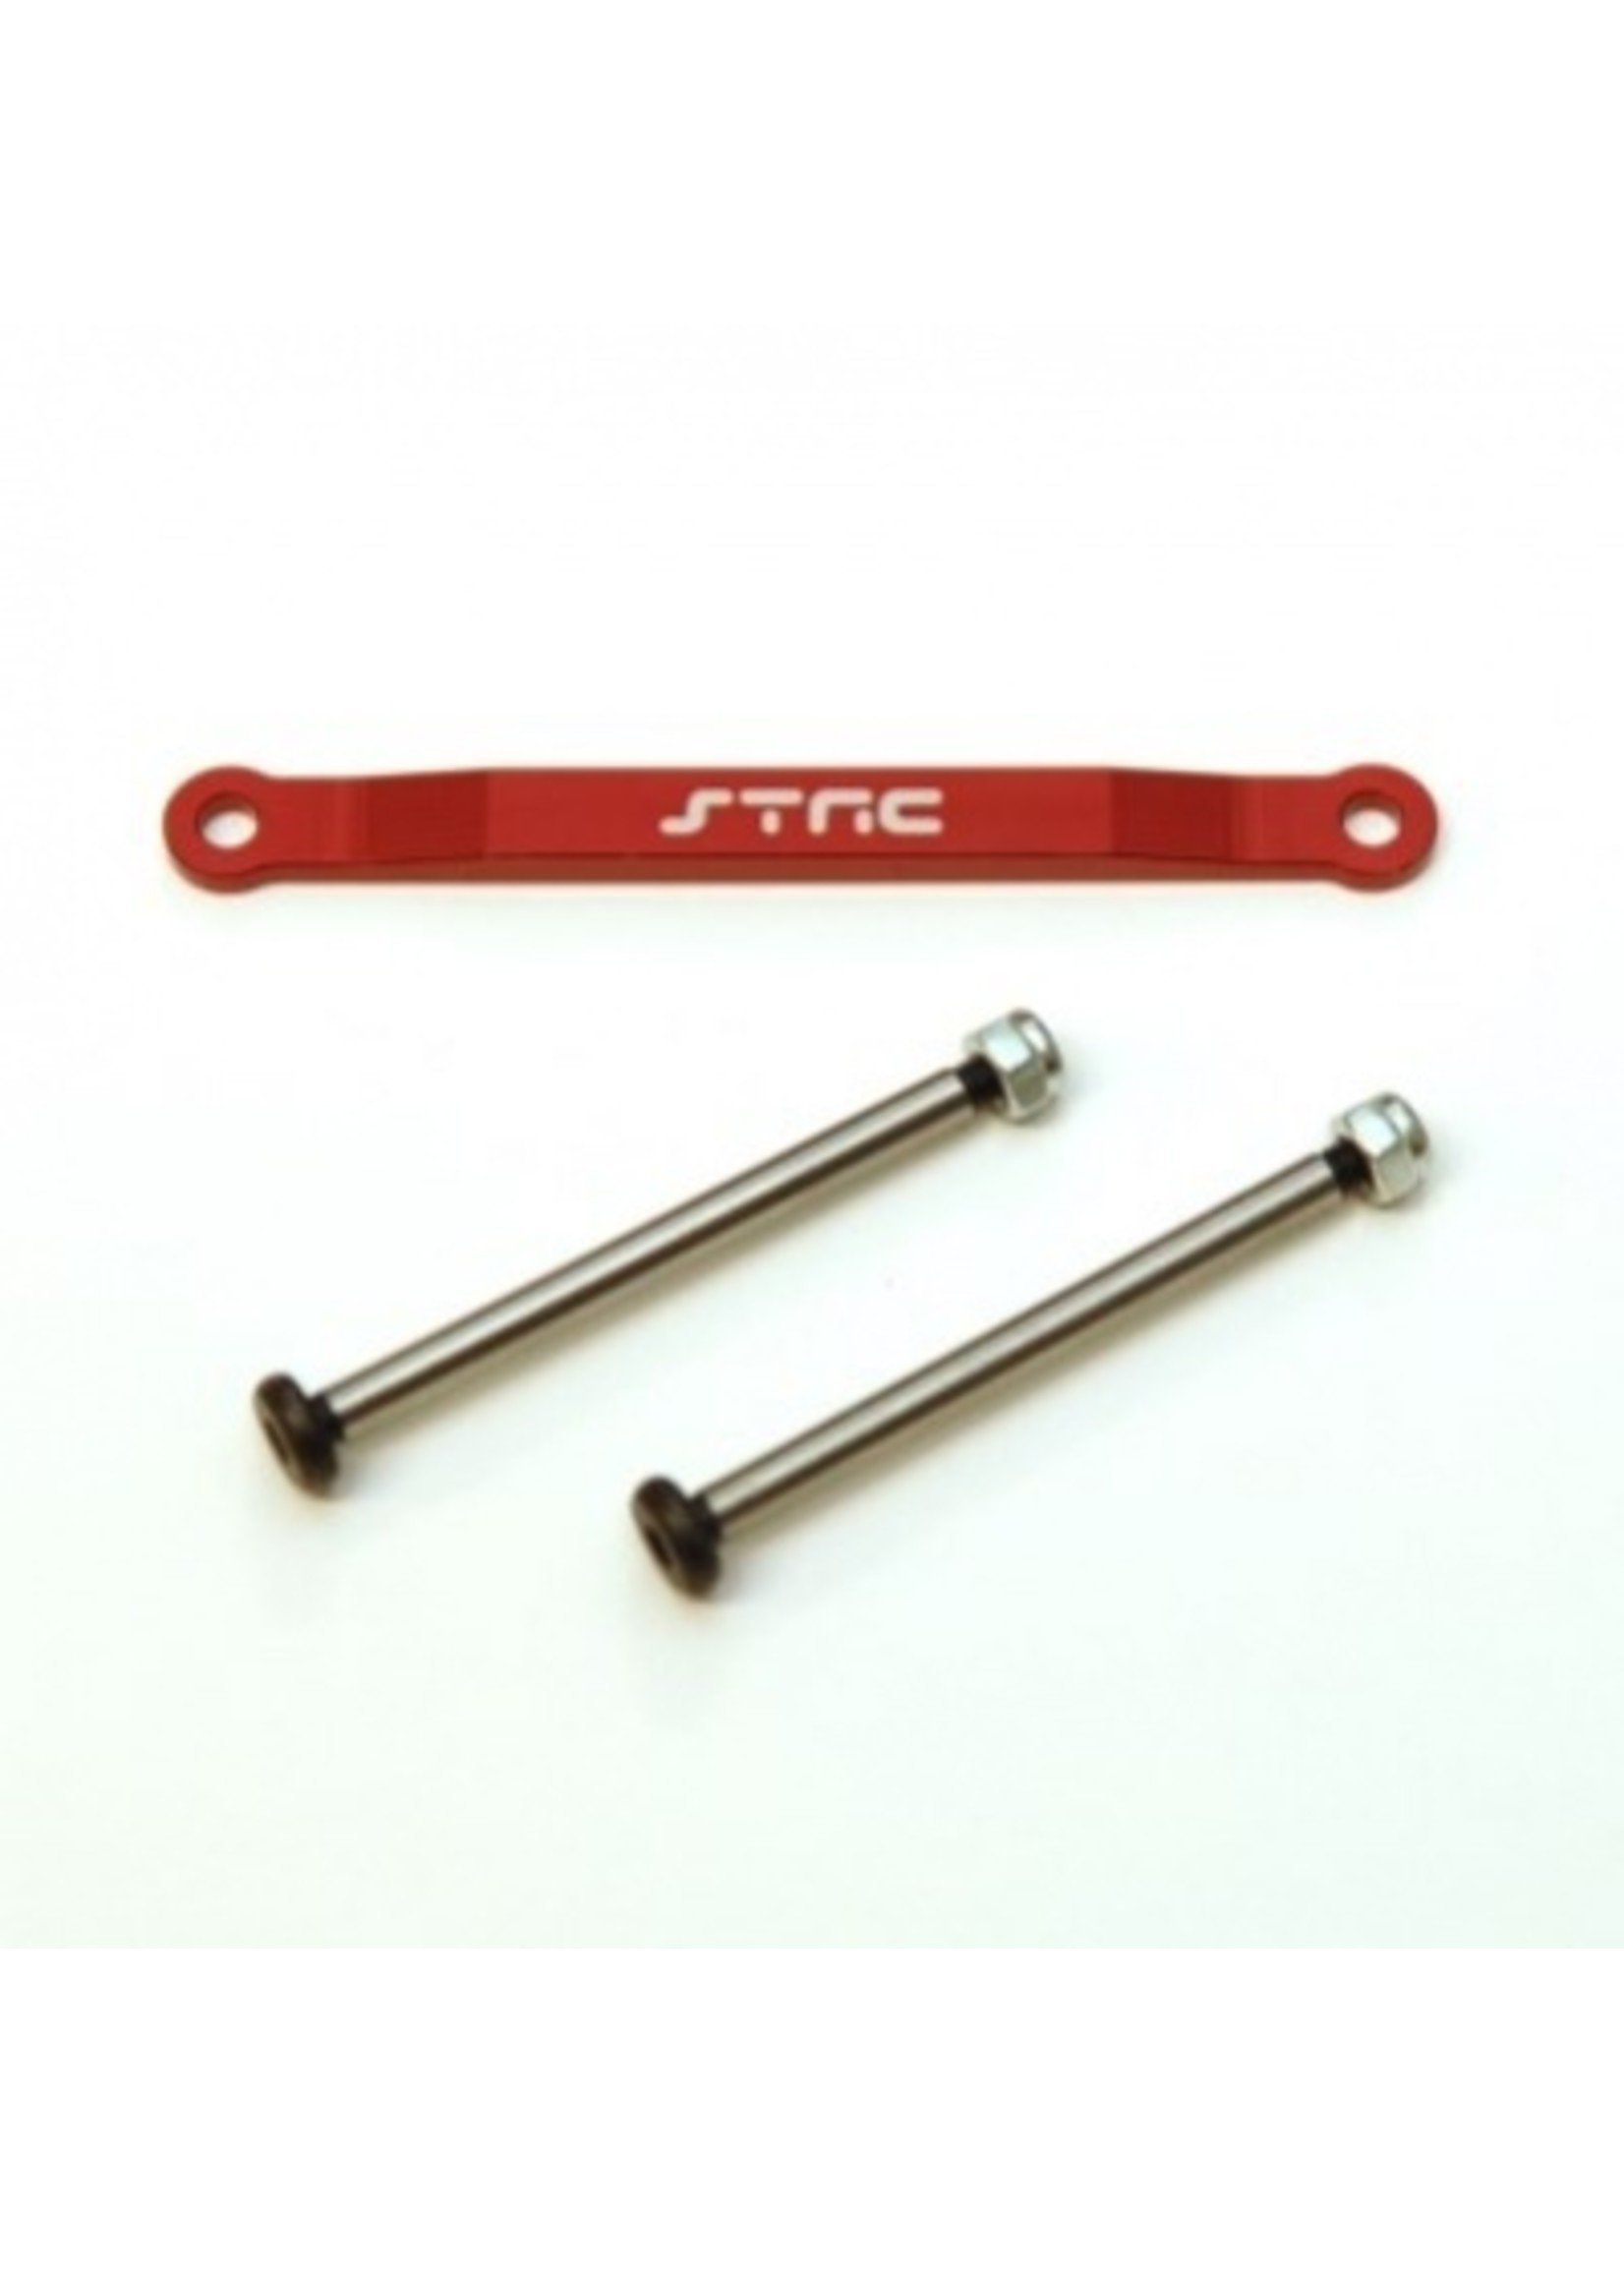 ST Racing Concepts SPTST2532XR ST Racing Concepts CNC Aluminum Front Hingepin Brace Kit, w/Lock-nut Style Hingepins (Red)